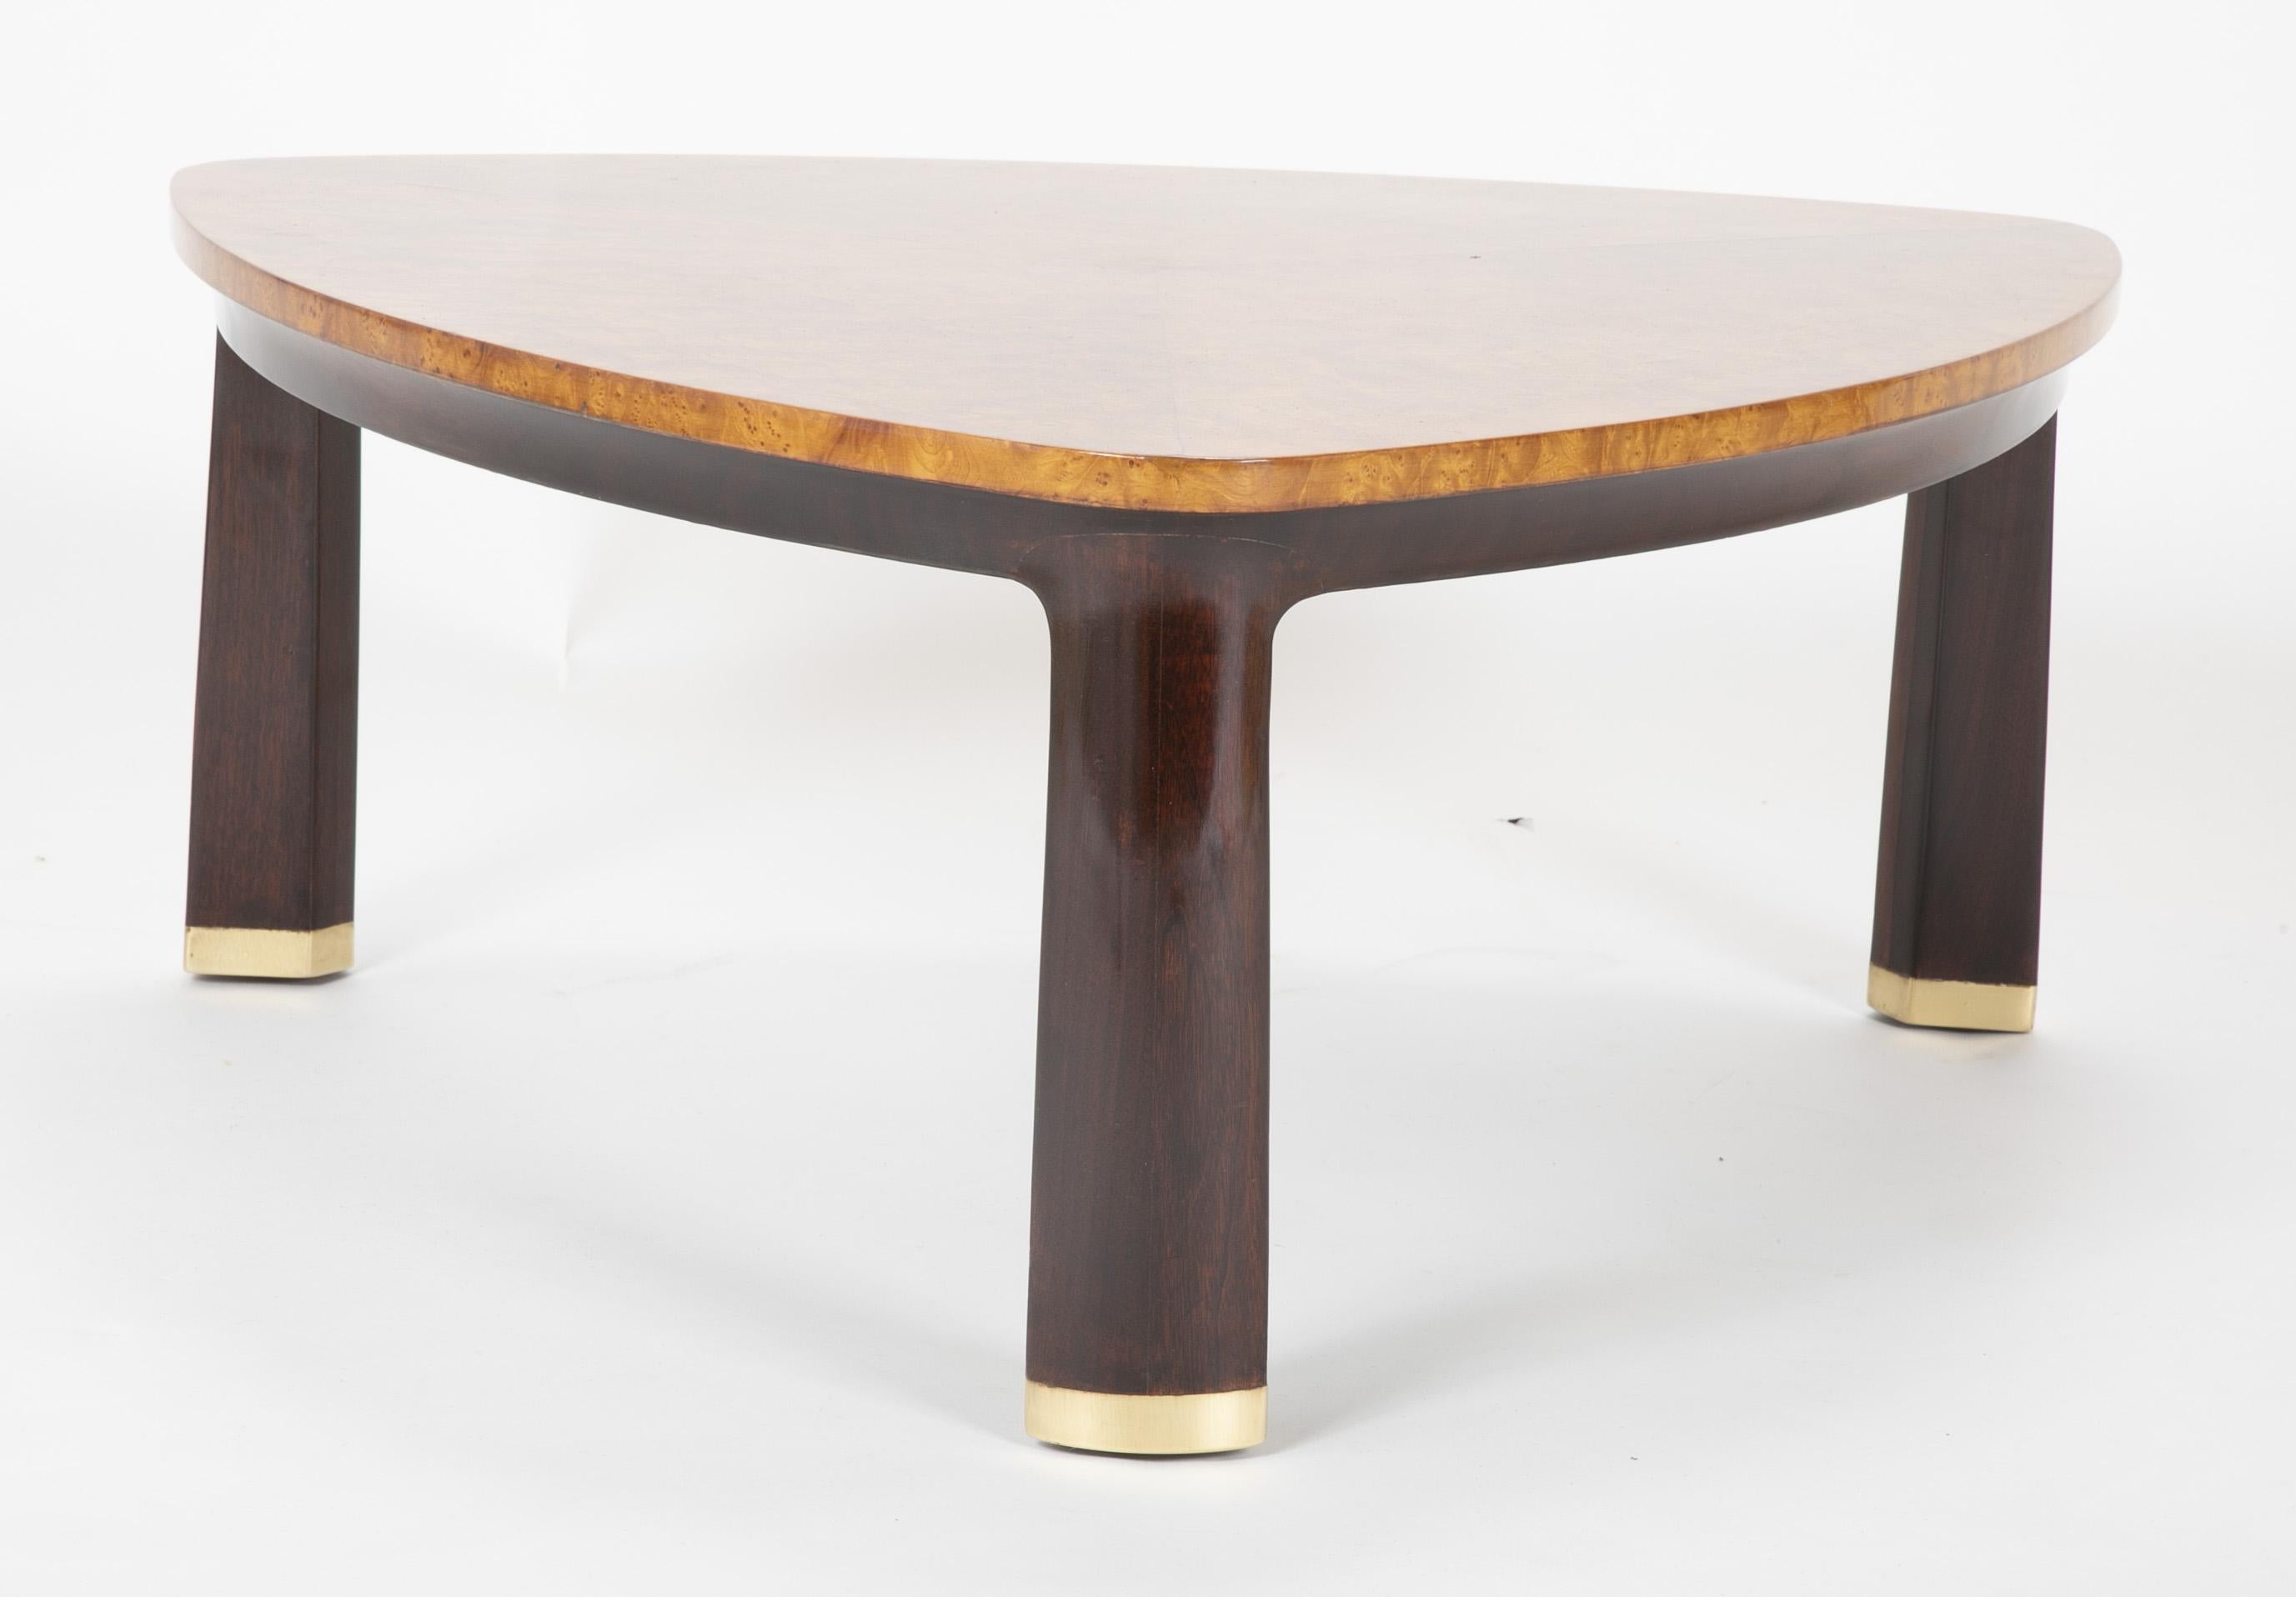 A burled triangular top coffee table rising from three walnut legs tipped with brass caps. Designed by Edward Wormley for Dunbar, circa 1955.